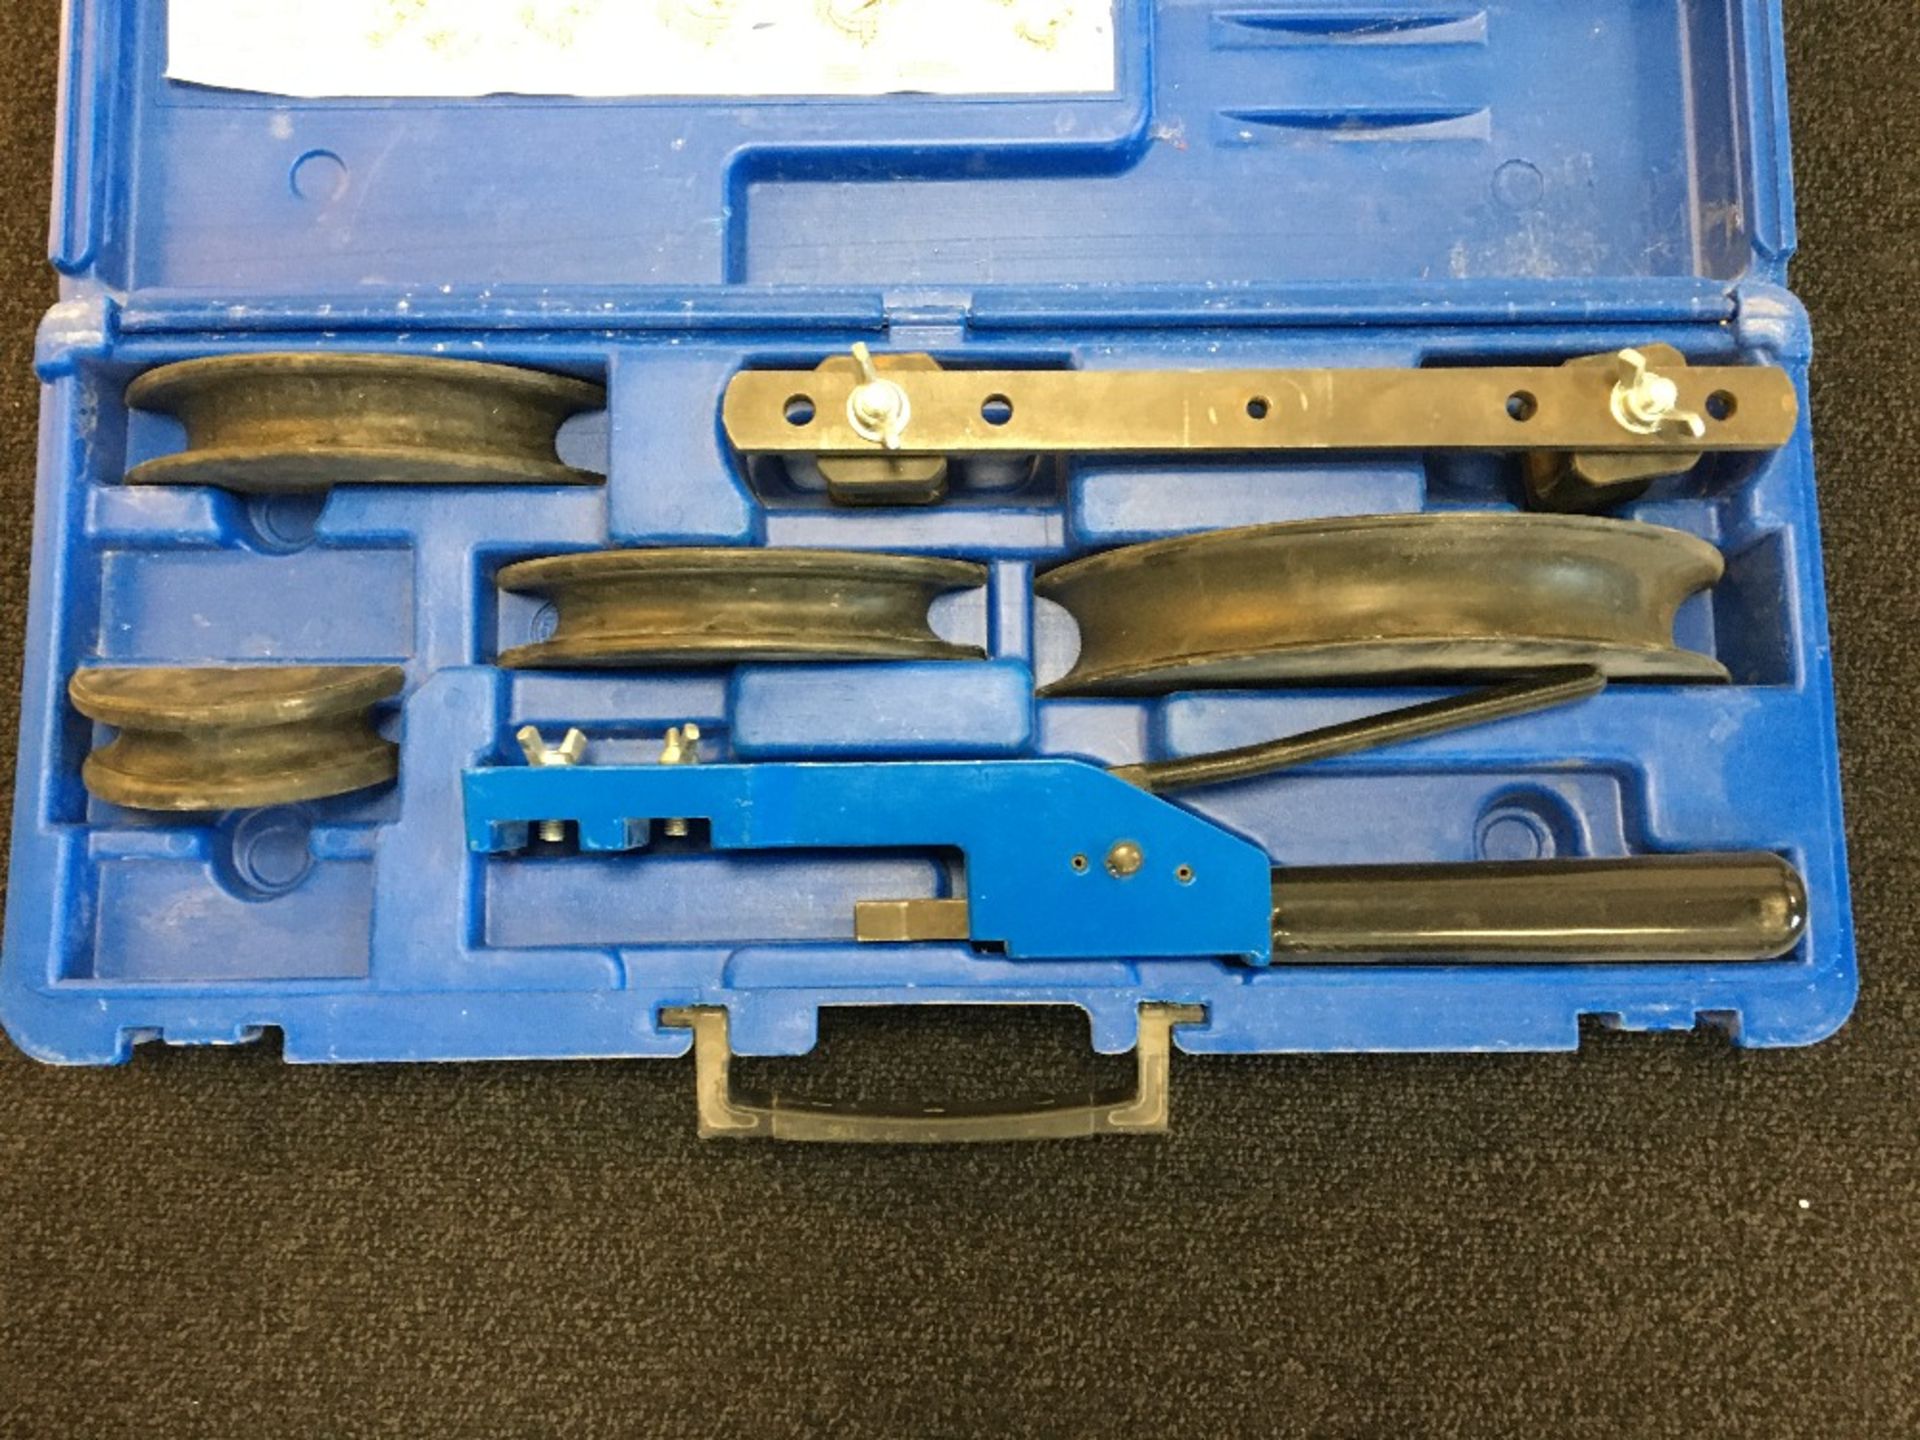 Uponor Bending Tool 16mm - 32mm with carry case - Image 4 of 4